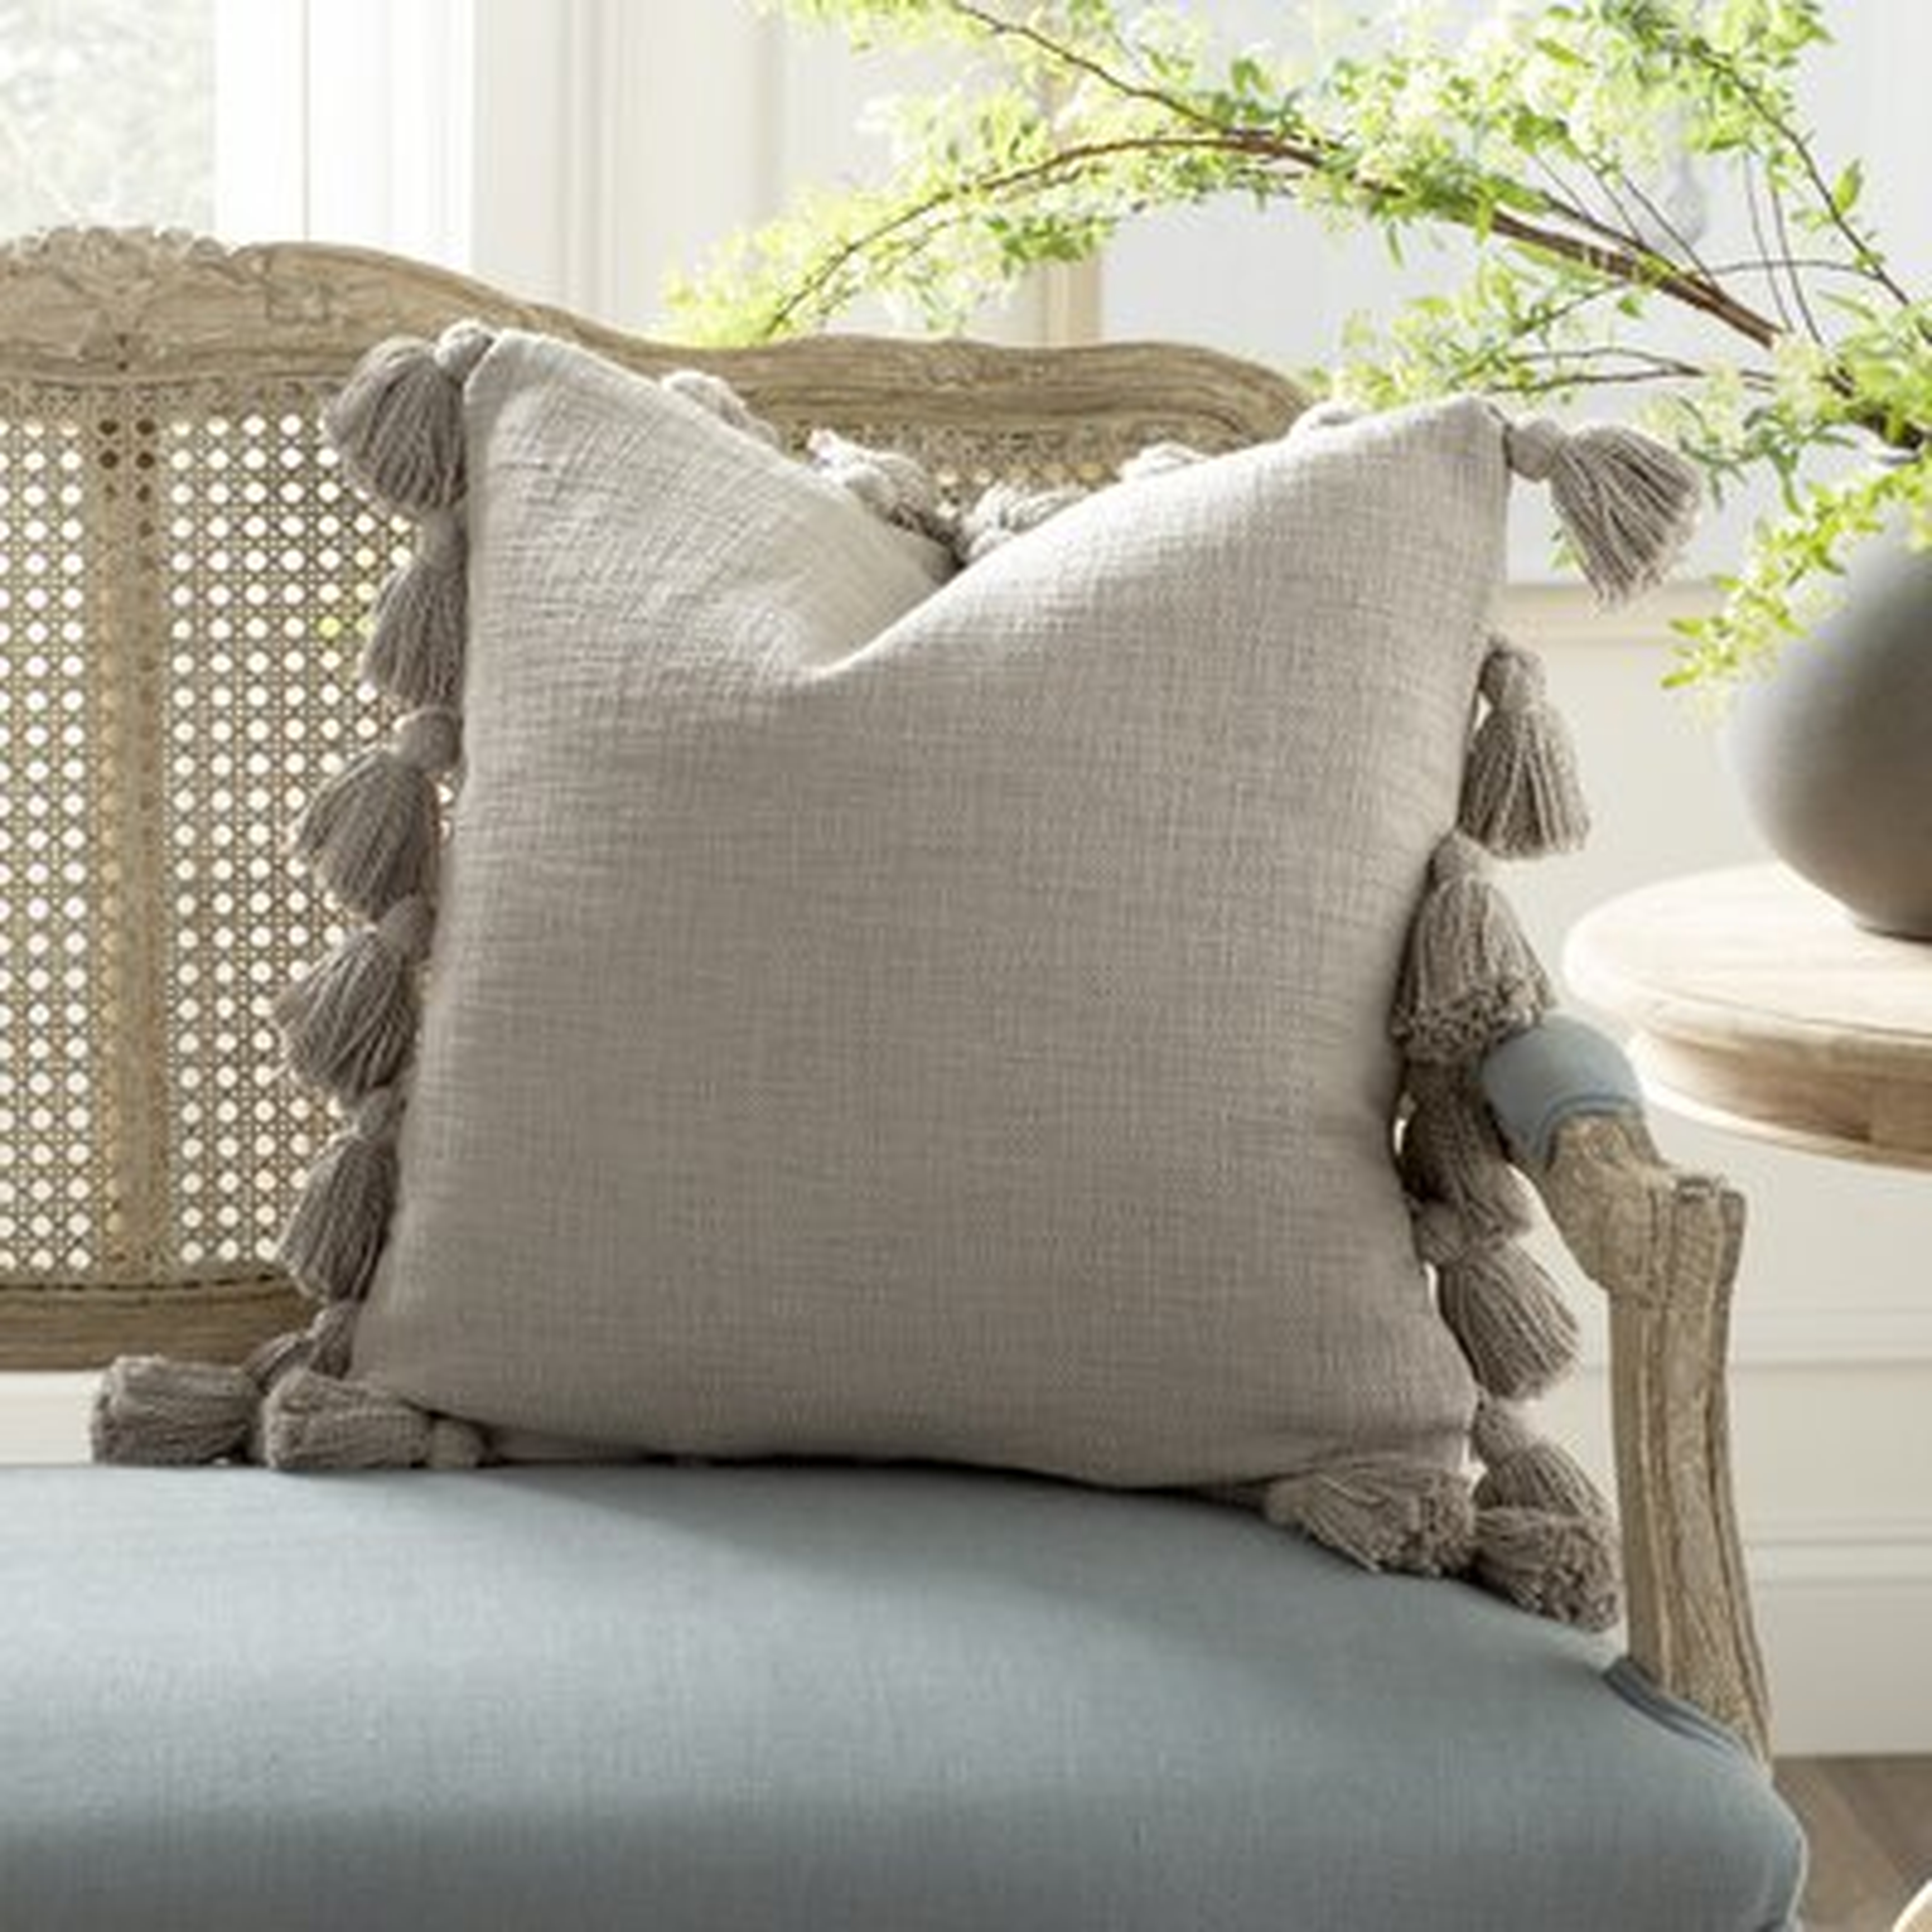 Interlude Luxurious Square Cotton Pillow Cover and Insert - Wayfair